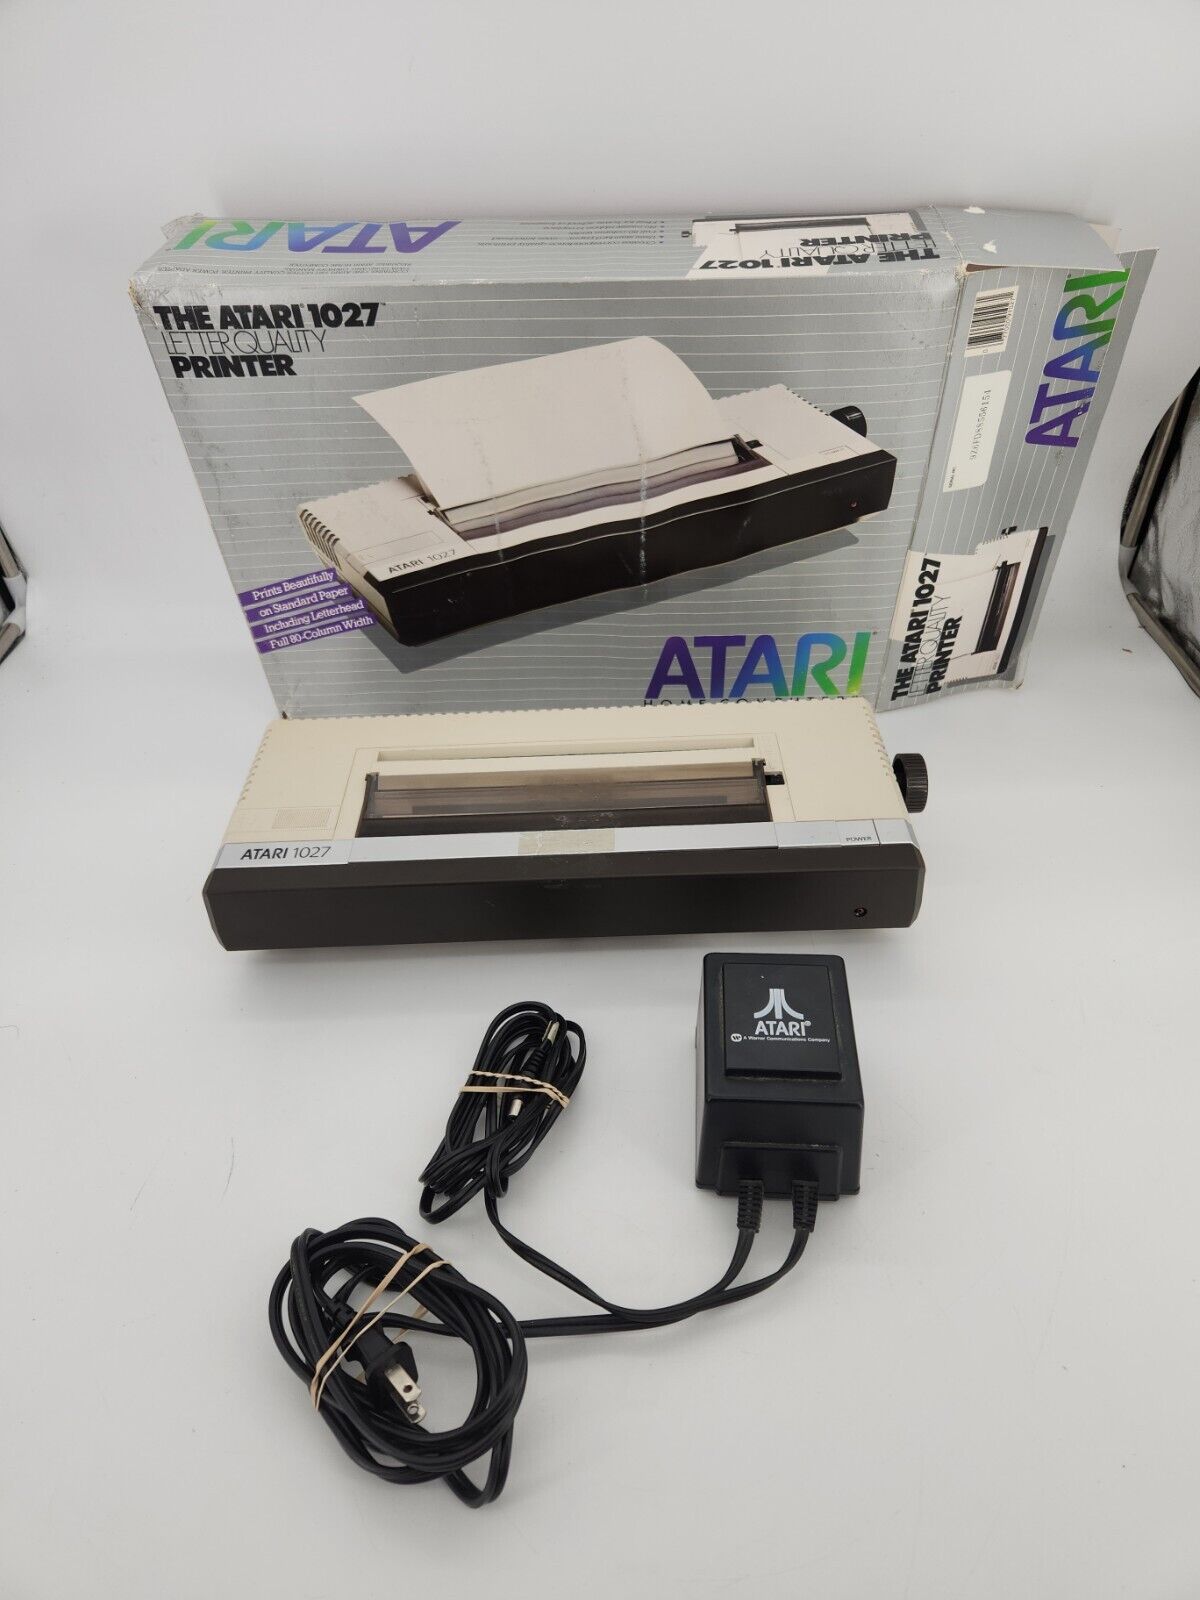 Vintage Atari 1027 Letter Quality Printer With Box & Power Supply - Powers on